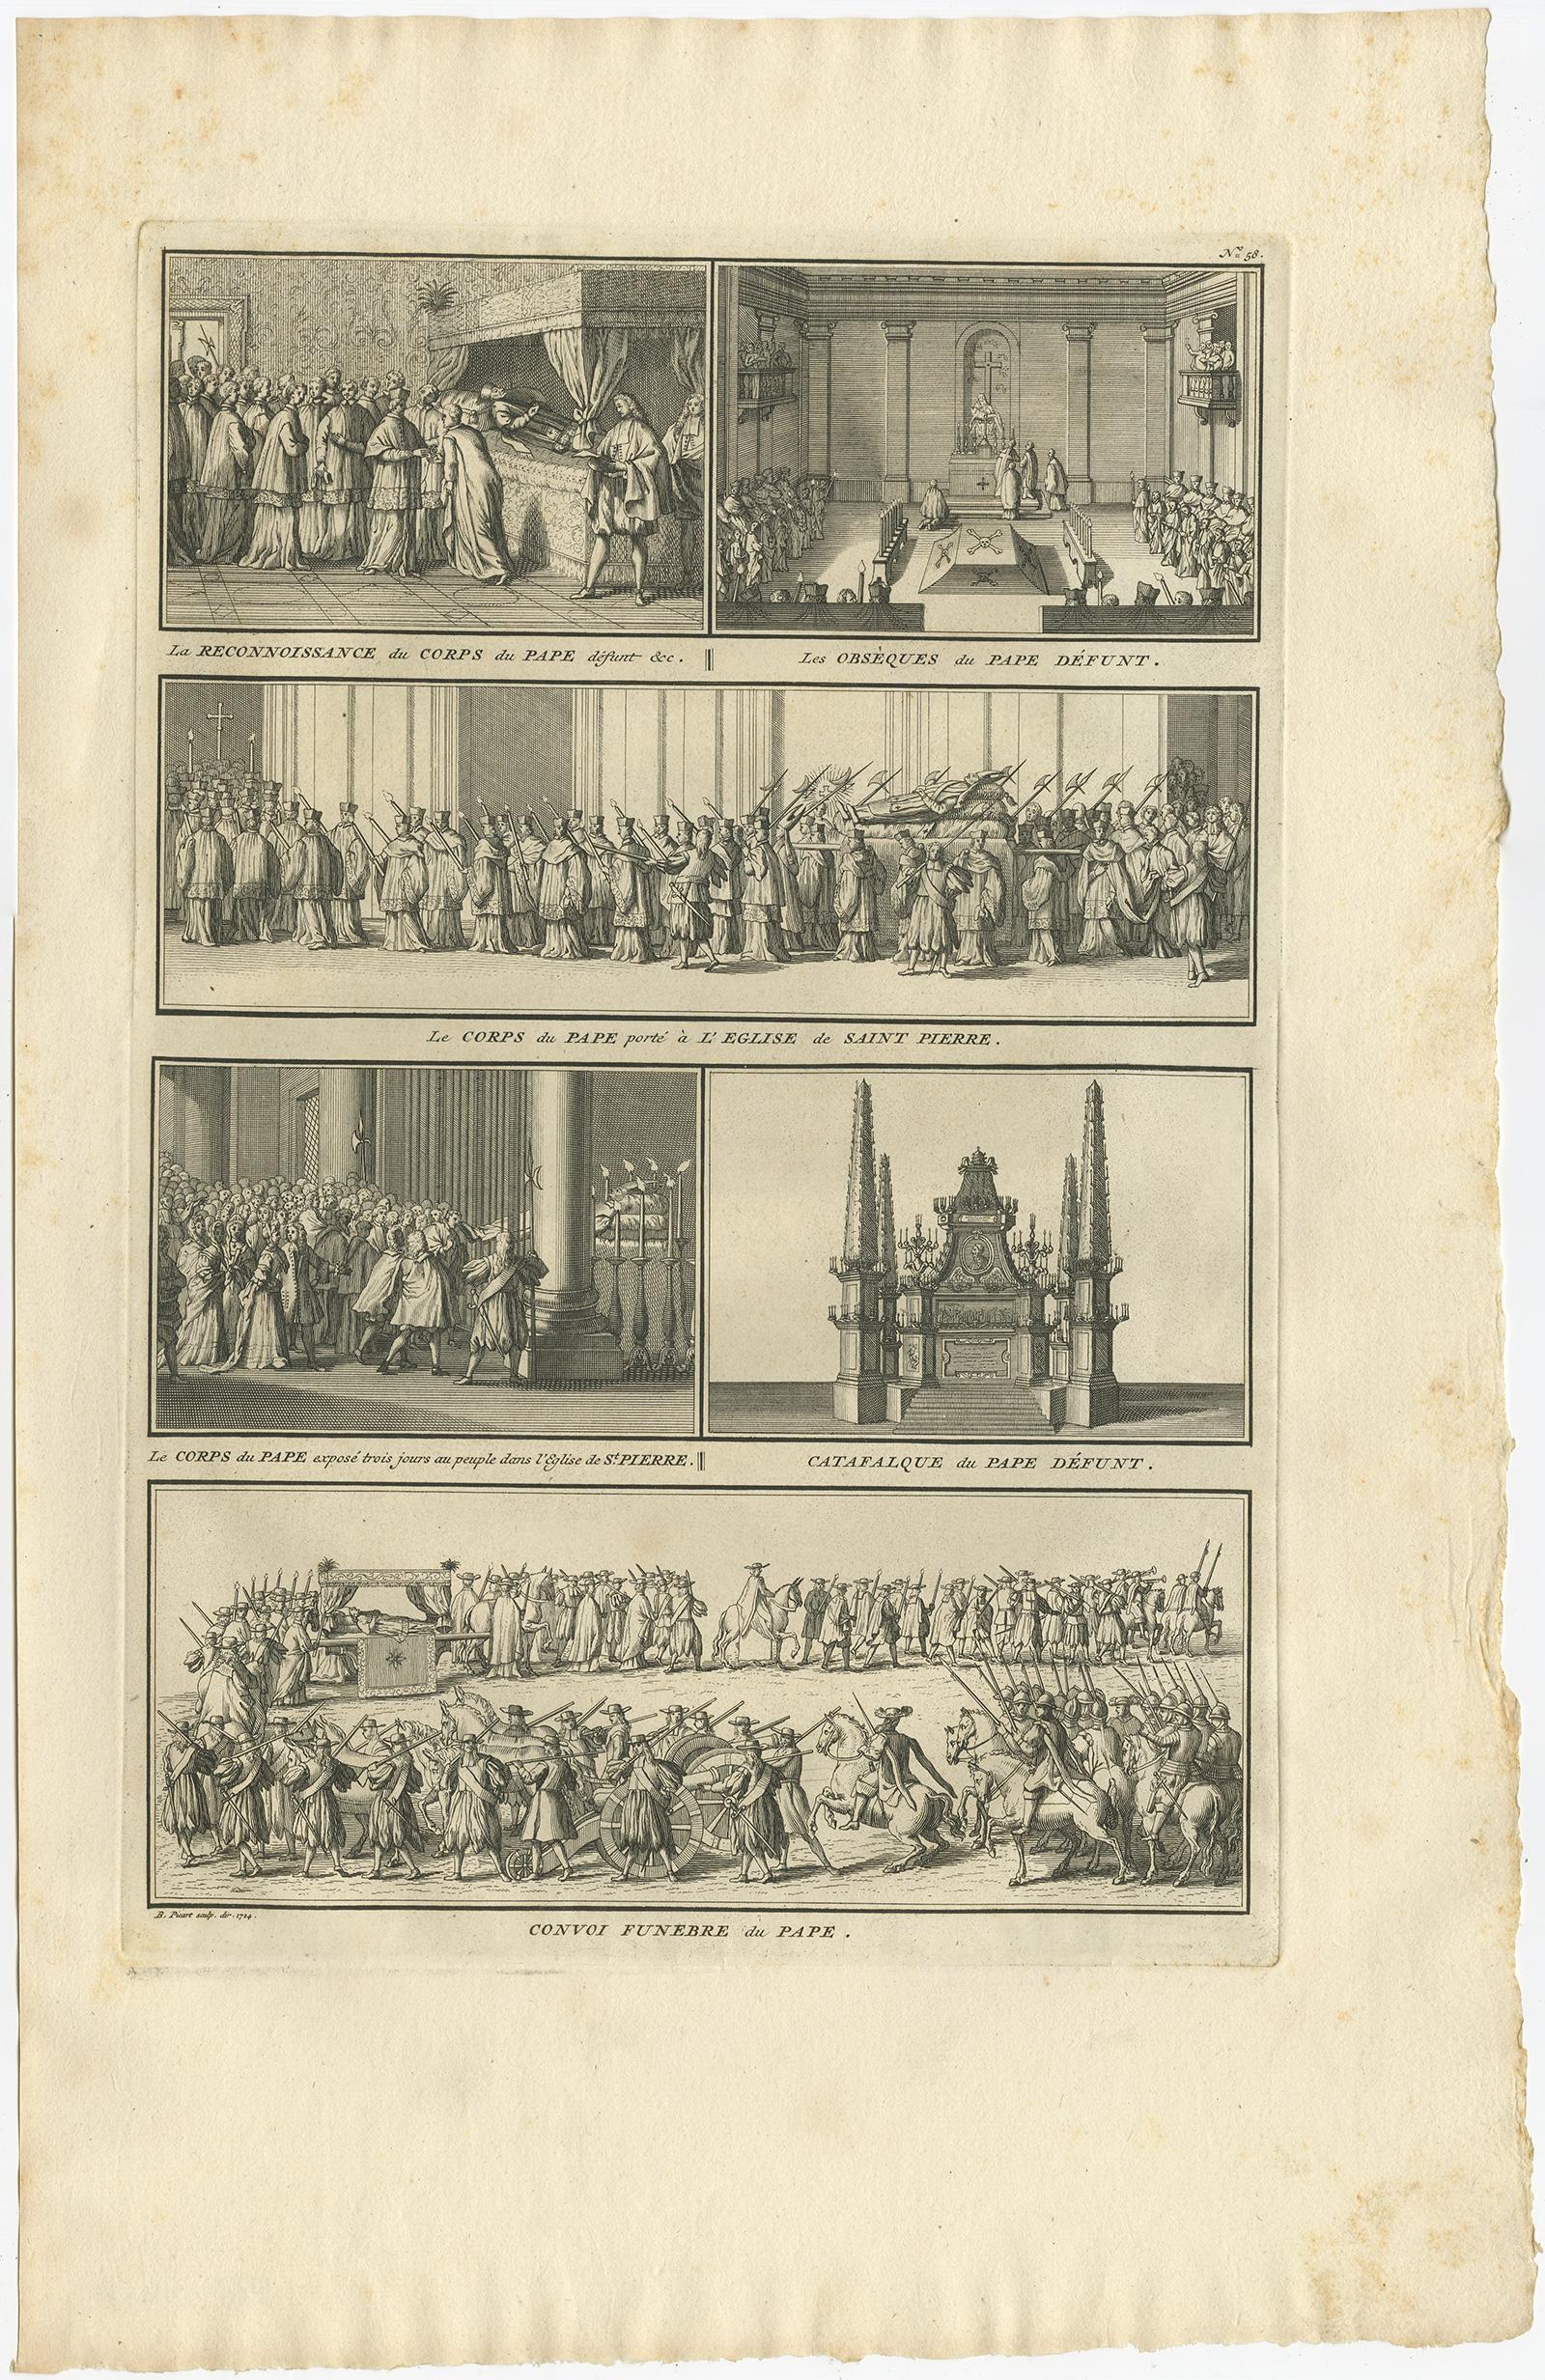 Antique religion print depicting rituals and ceremonies for the death of the Pope. 

Originates from 'Ceremonies et coutumes Religieuses...' , by A. Moubach.

Artists and Engravers: Bernard Picart (1673-1733), a French painter and